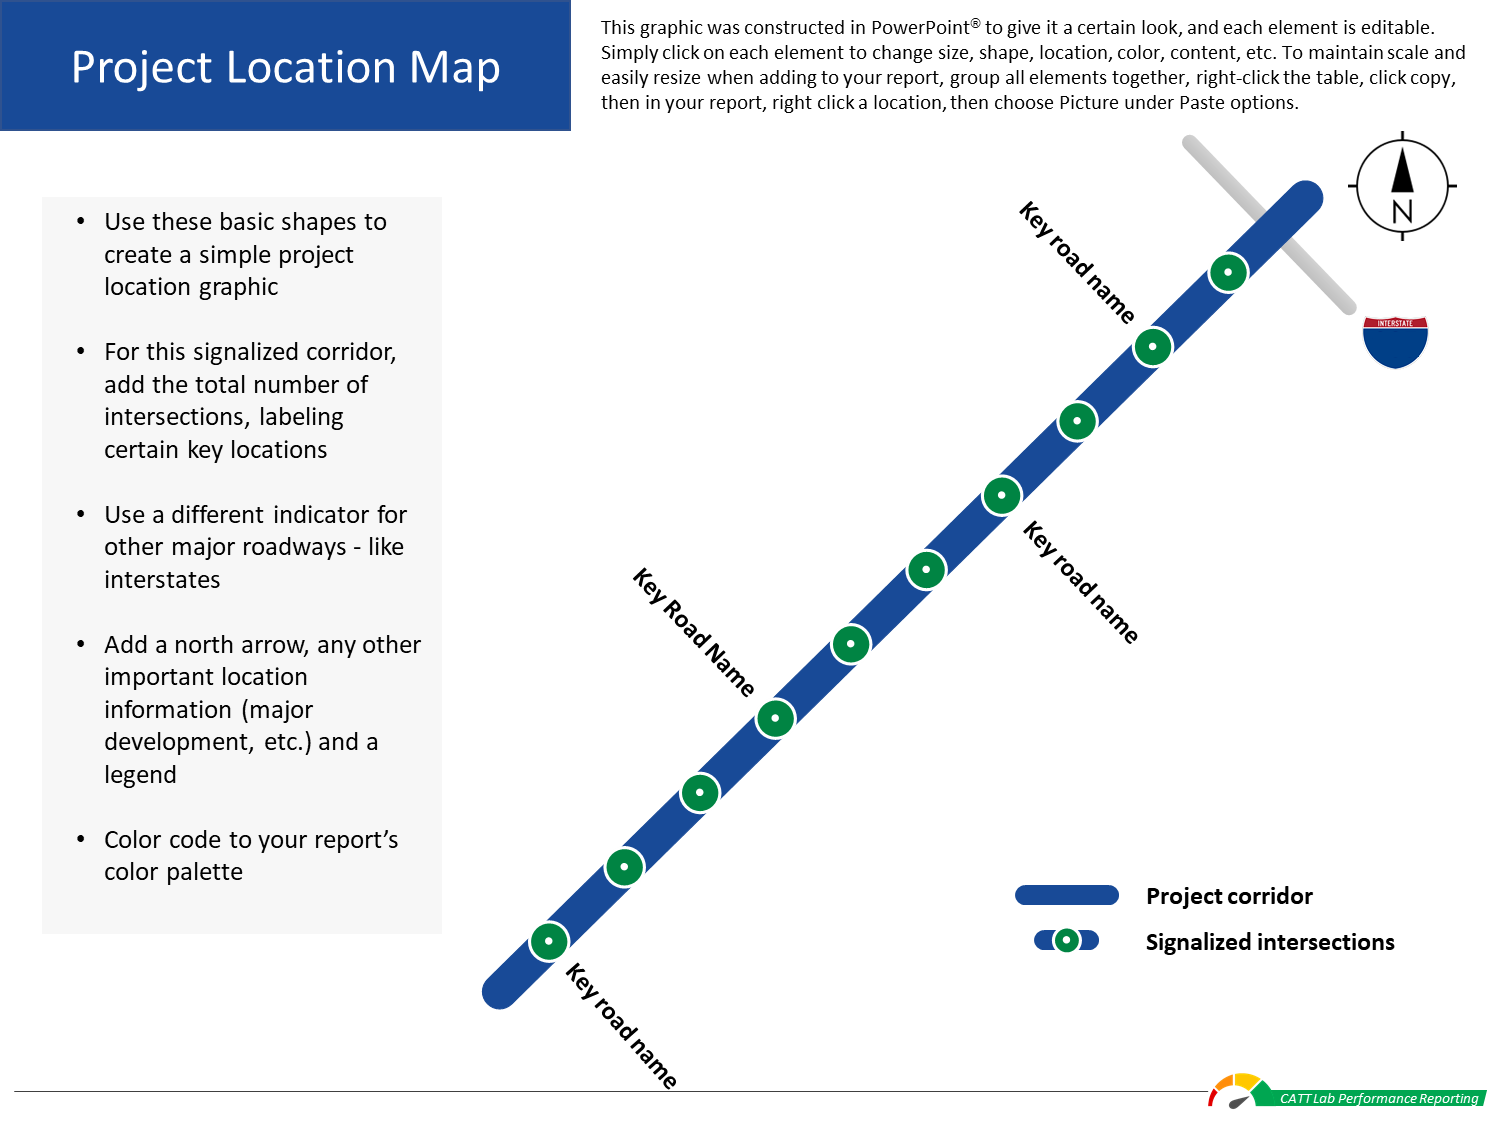 A template for a schematic map of the project location. At the top, there is a large header reading "Project Location Map" next to a paragraph of text describing the area. Below the header, on the left side there is a bulleted list with information. To the right of that bulleted list is a subway-style map of the corridor with circles representing intersections.